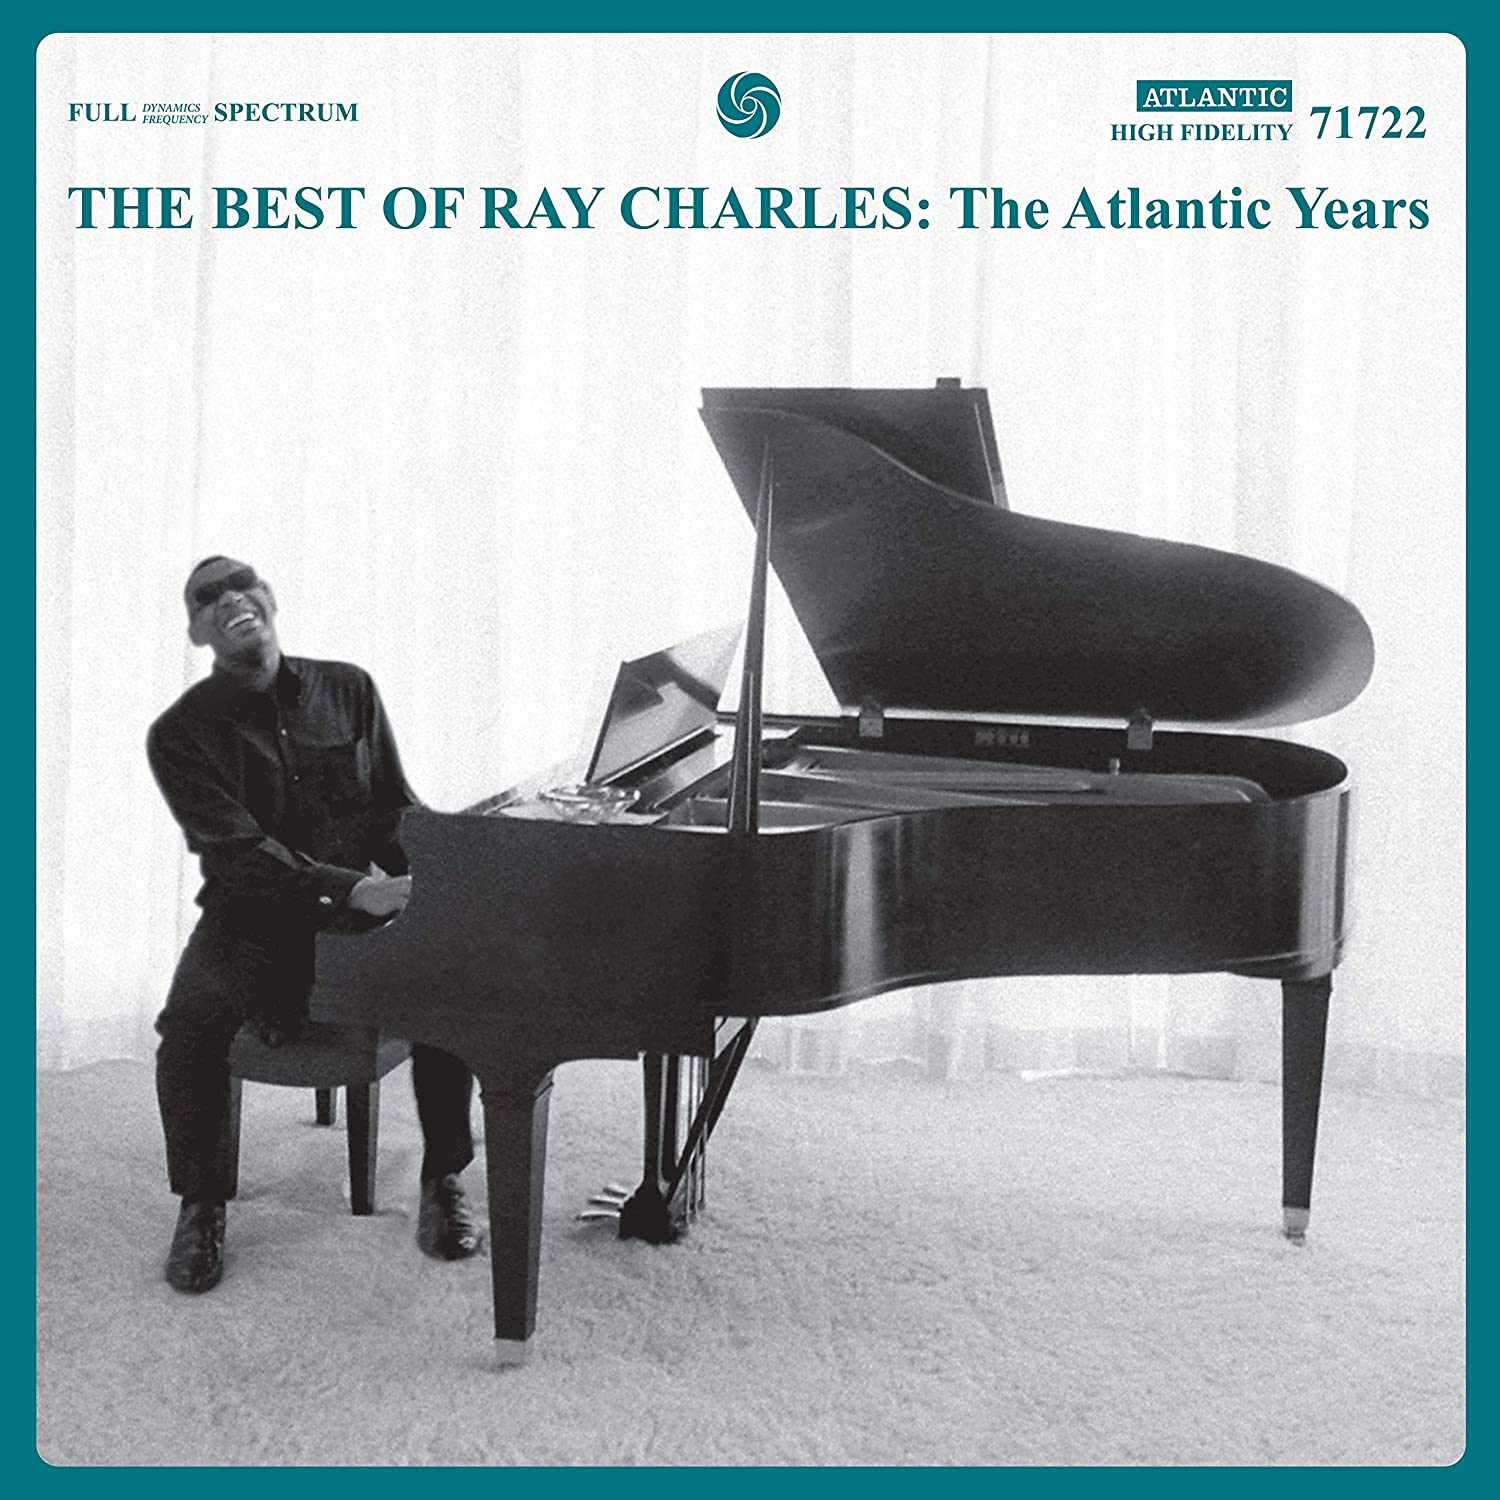 RAY CHARLES - The Best of Ray Charles: The Atlantic Years - 2LP - White Vinyl